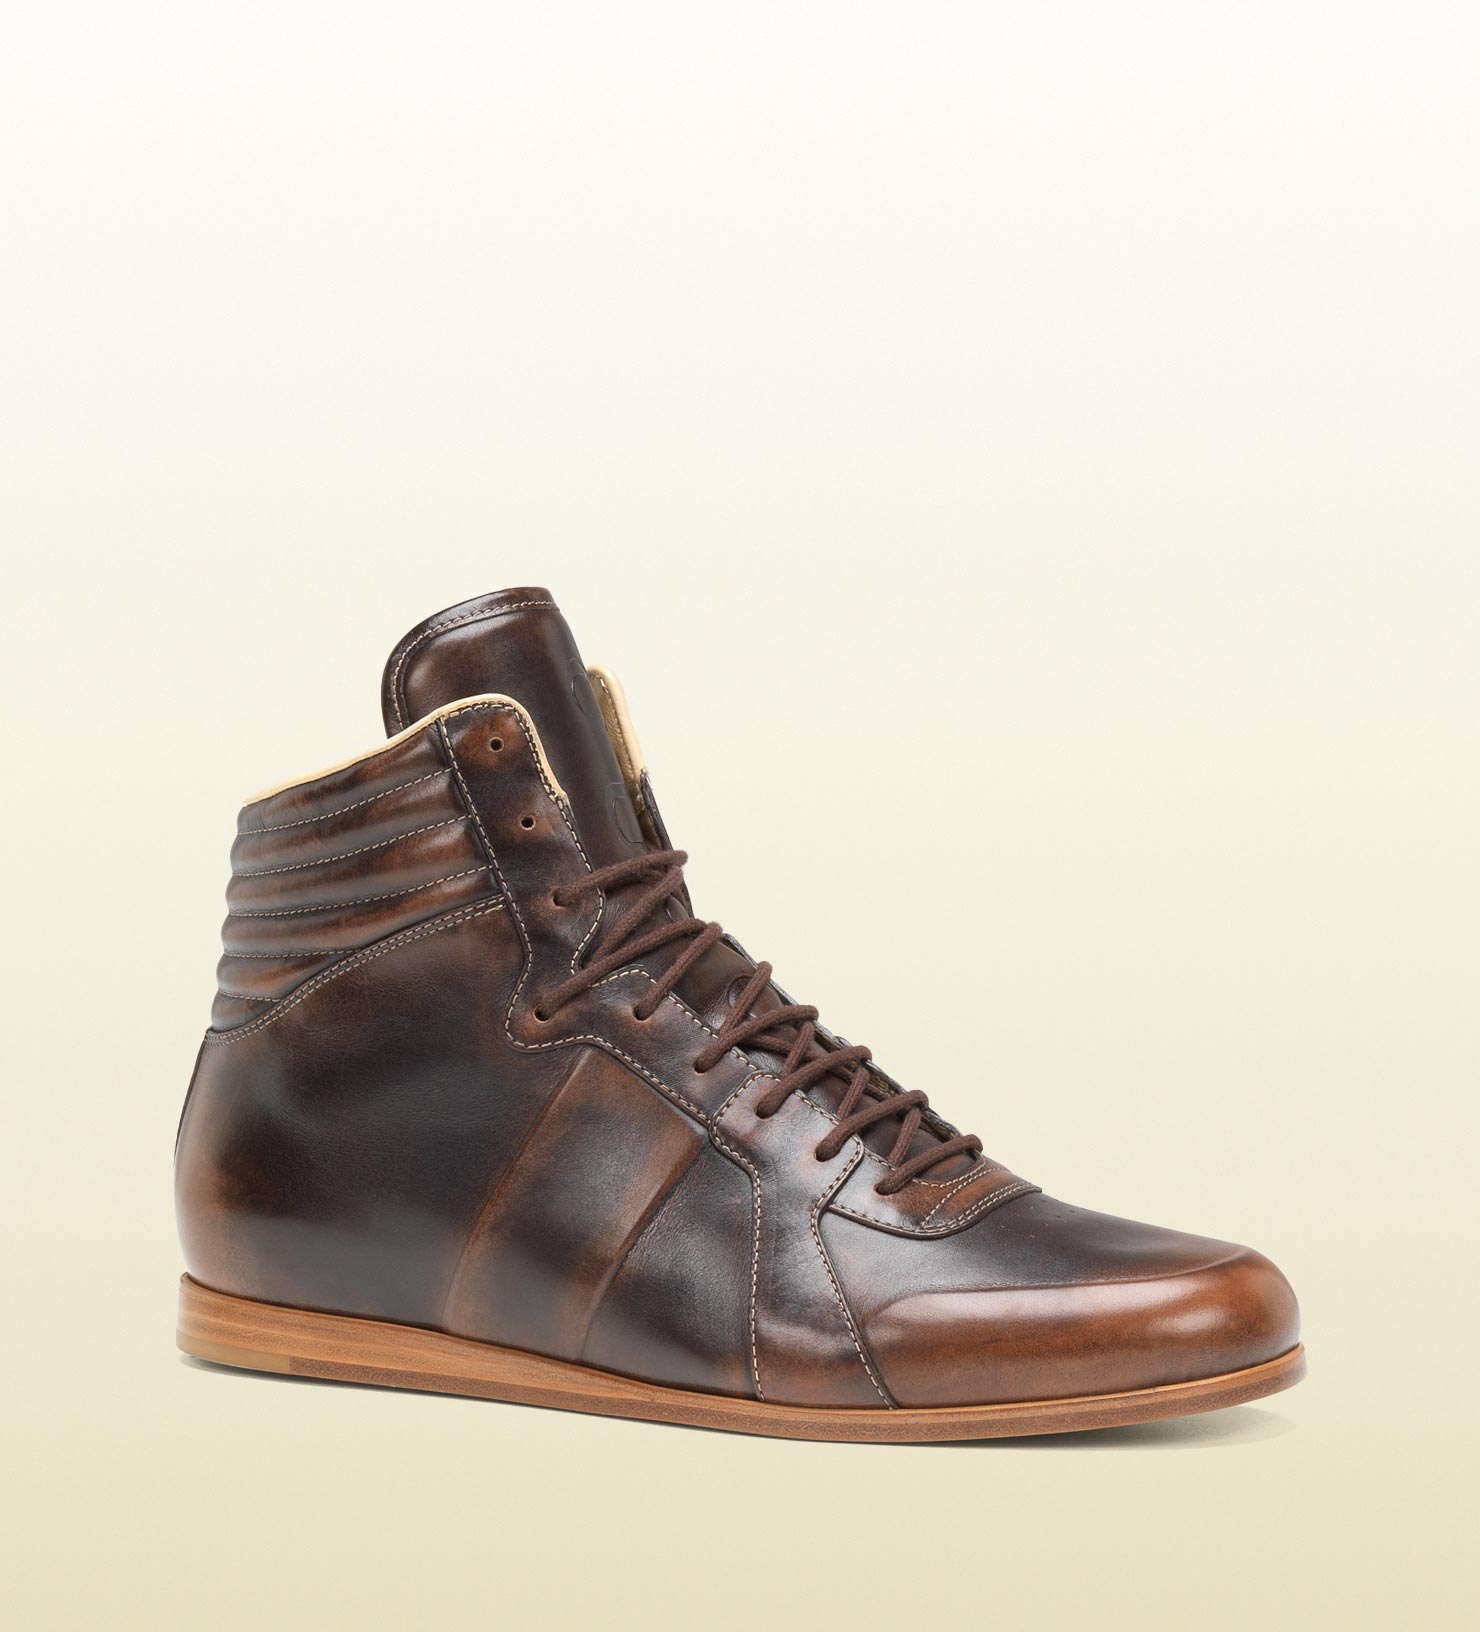 Gucci Men's Sporting Lace Up Boot